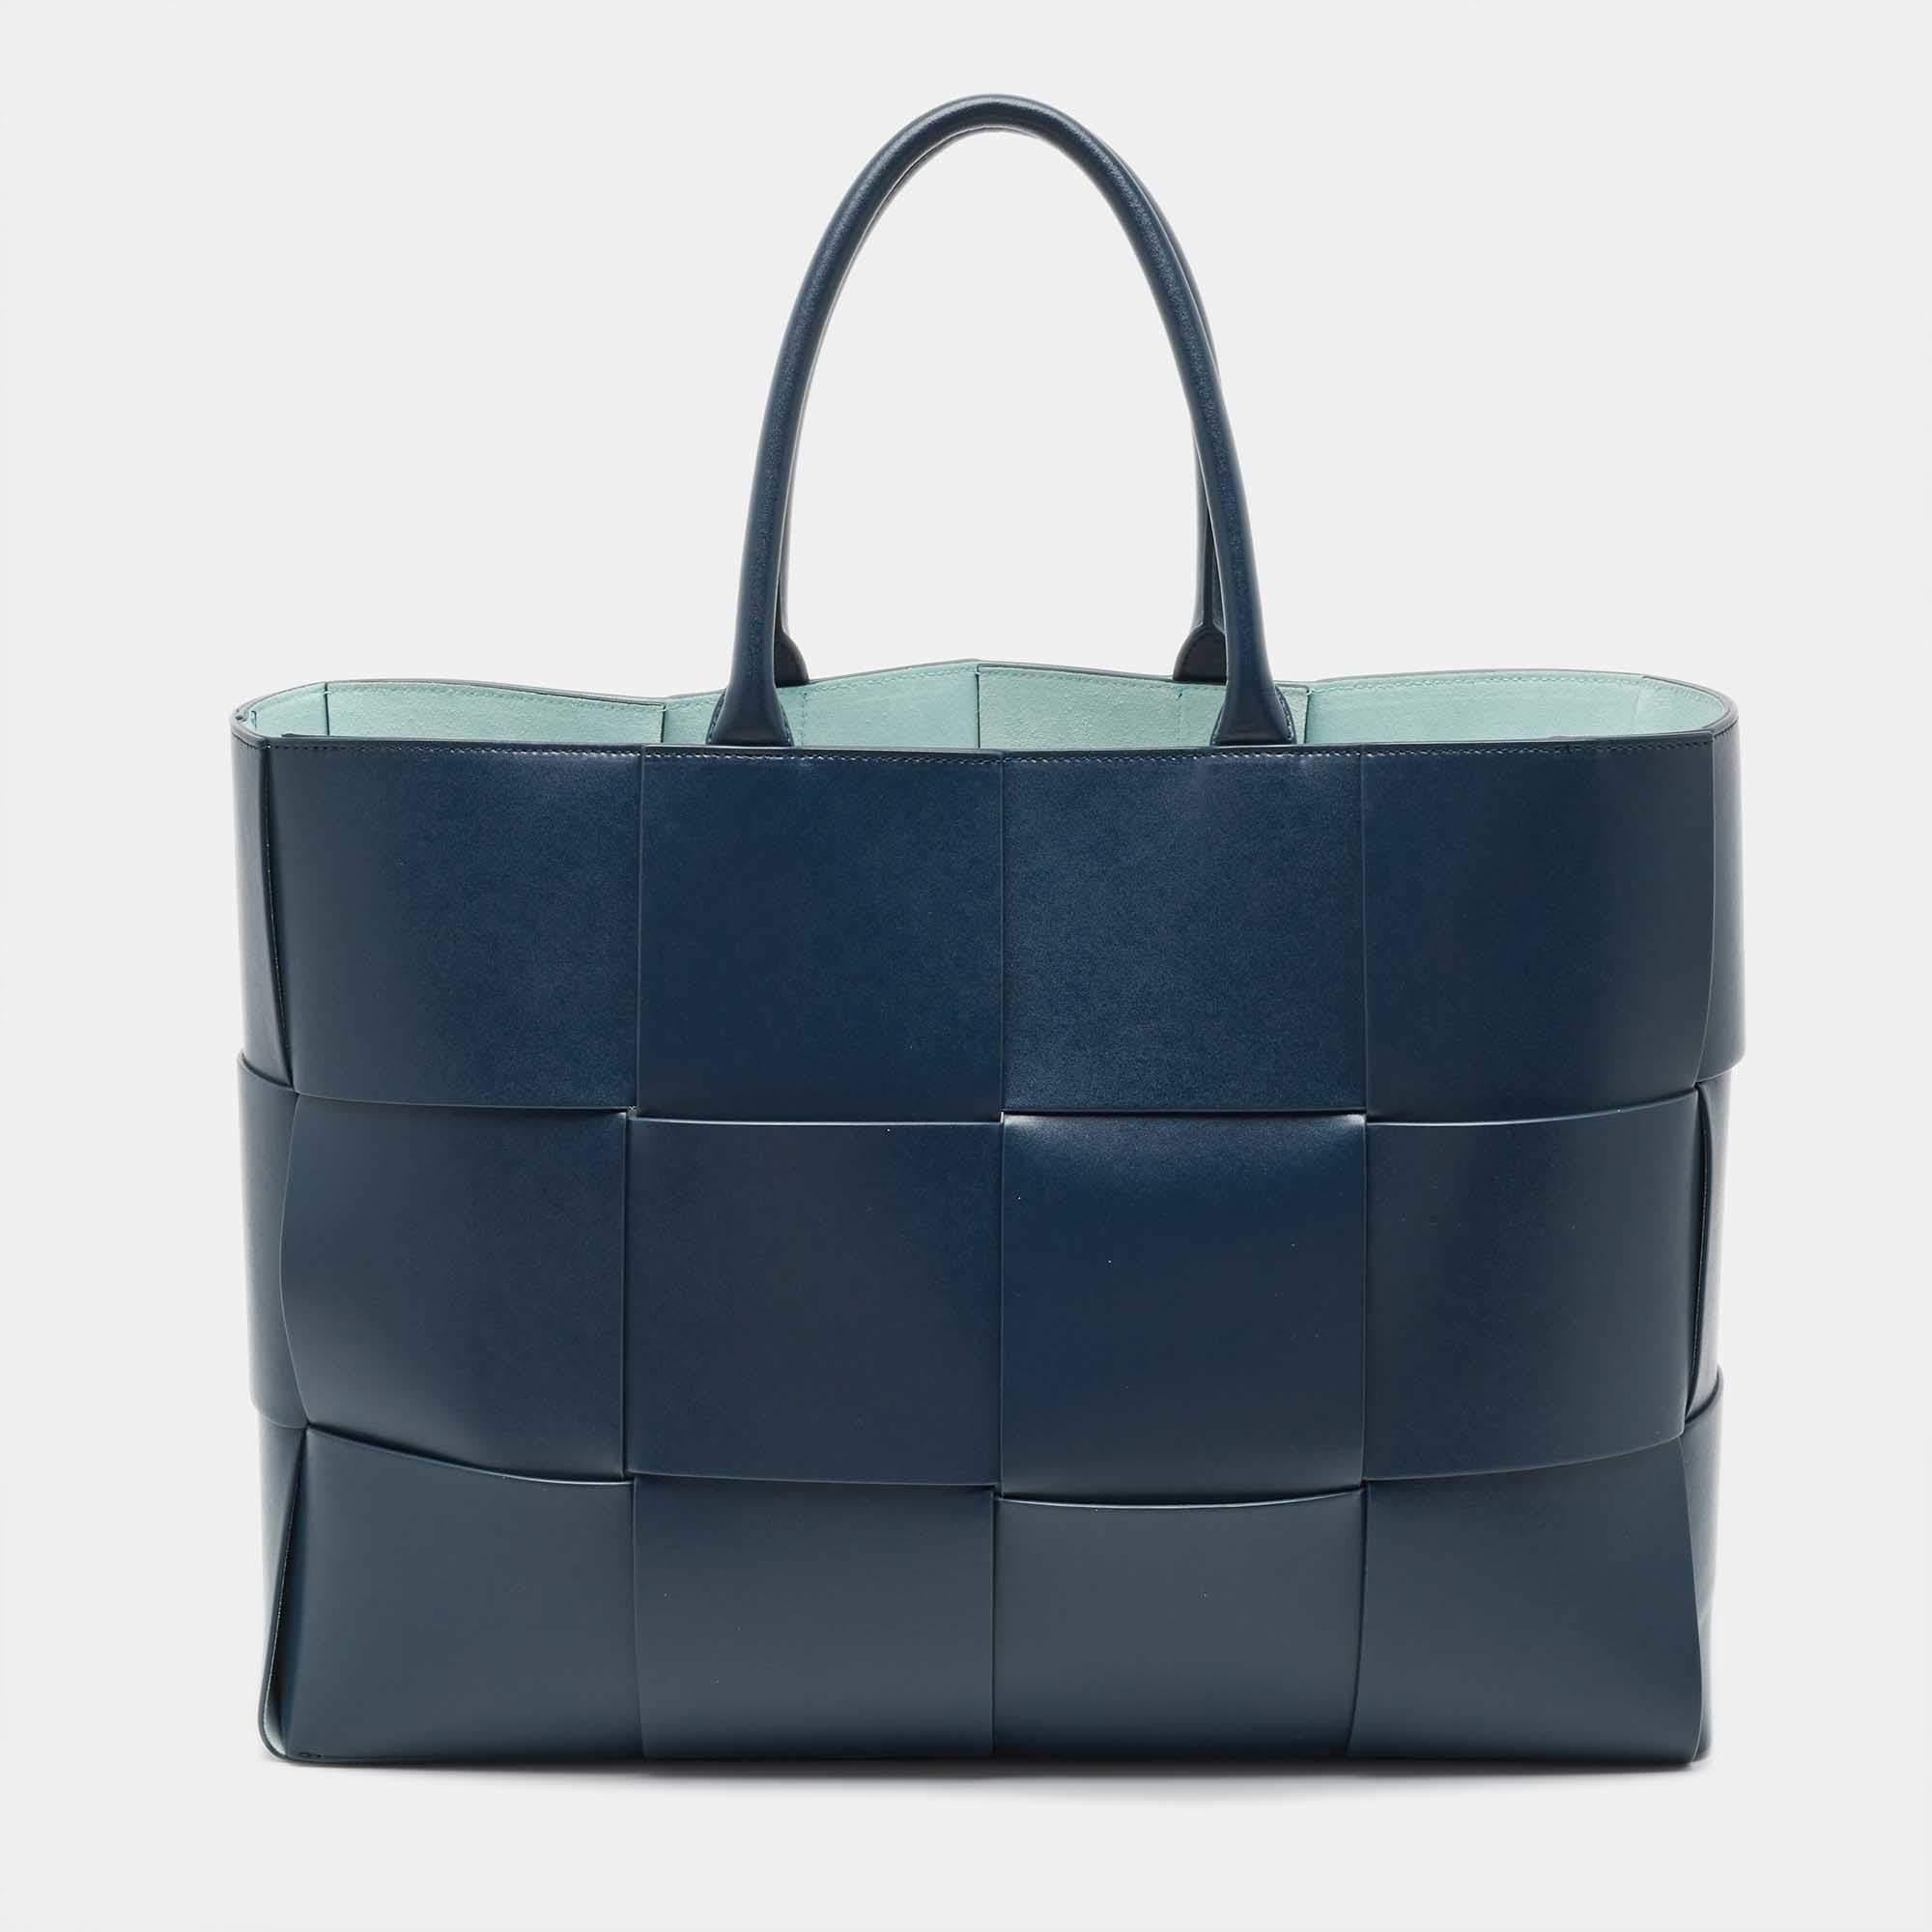 This Arco tote from the House of Bottega Veneta is great for everyday use. It has an Intrecciato leather exterior and showcases dual handles, a sturdy shape, and gold-toned hardware. It is provided with a spacious interior.

Includes: Original